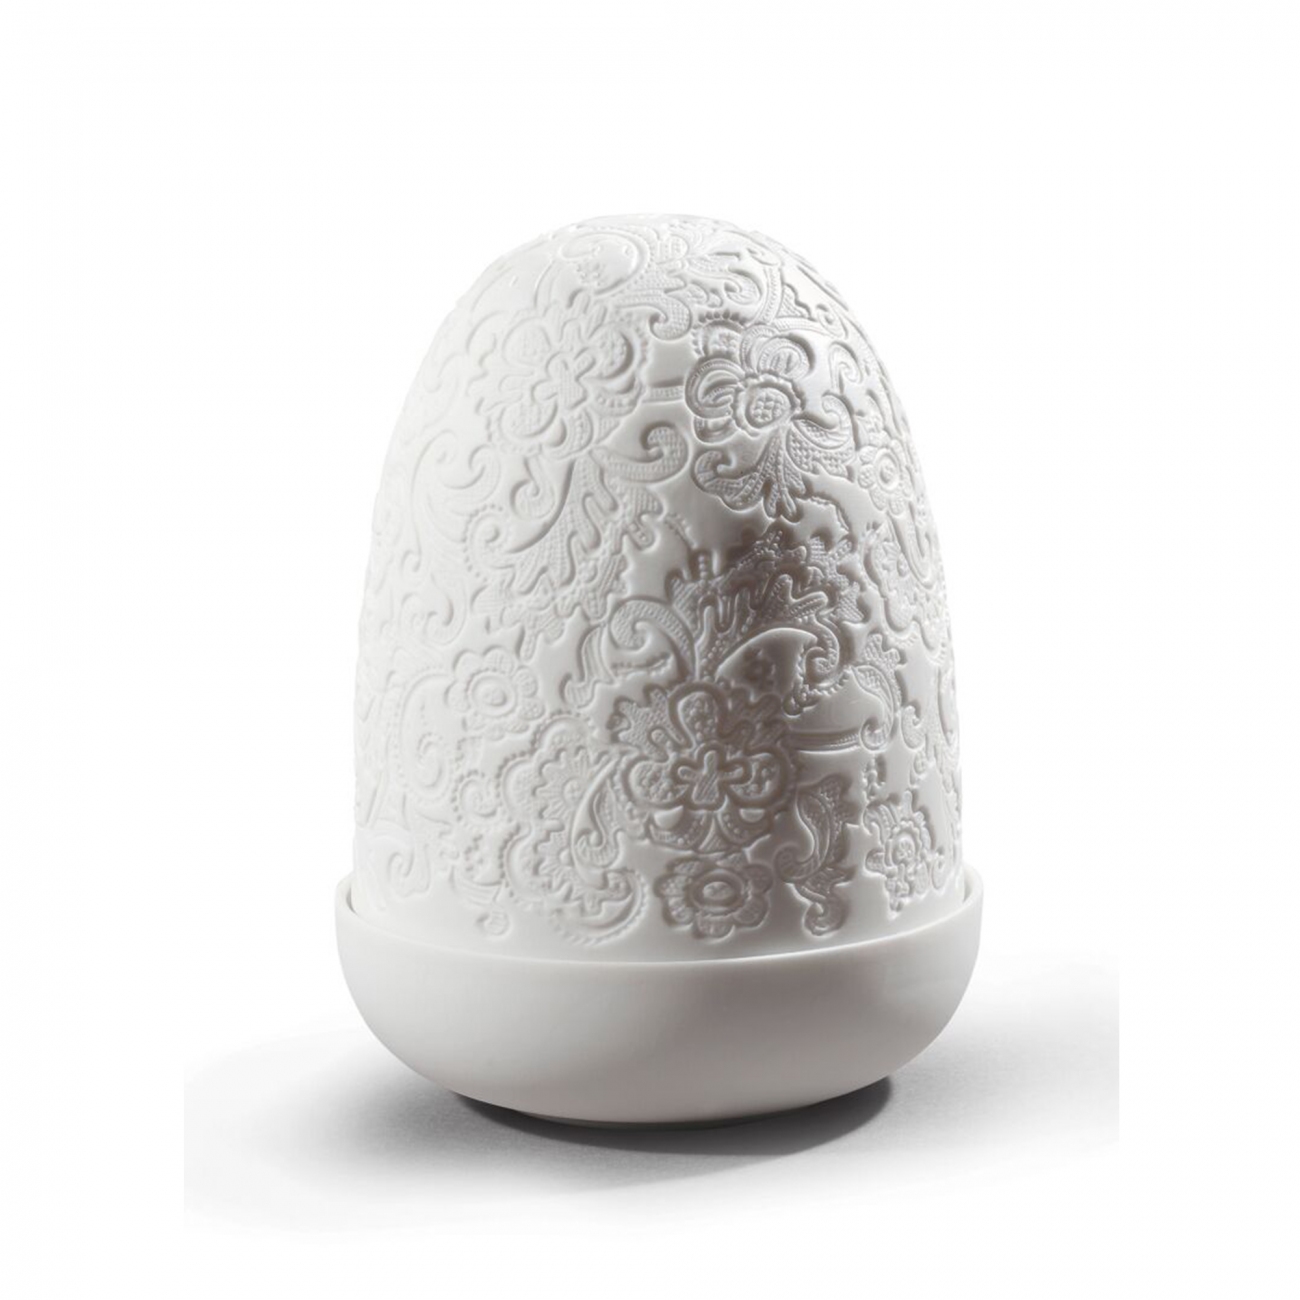 Lladró Lace Dome Table lamp